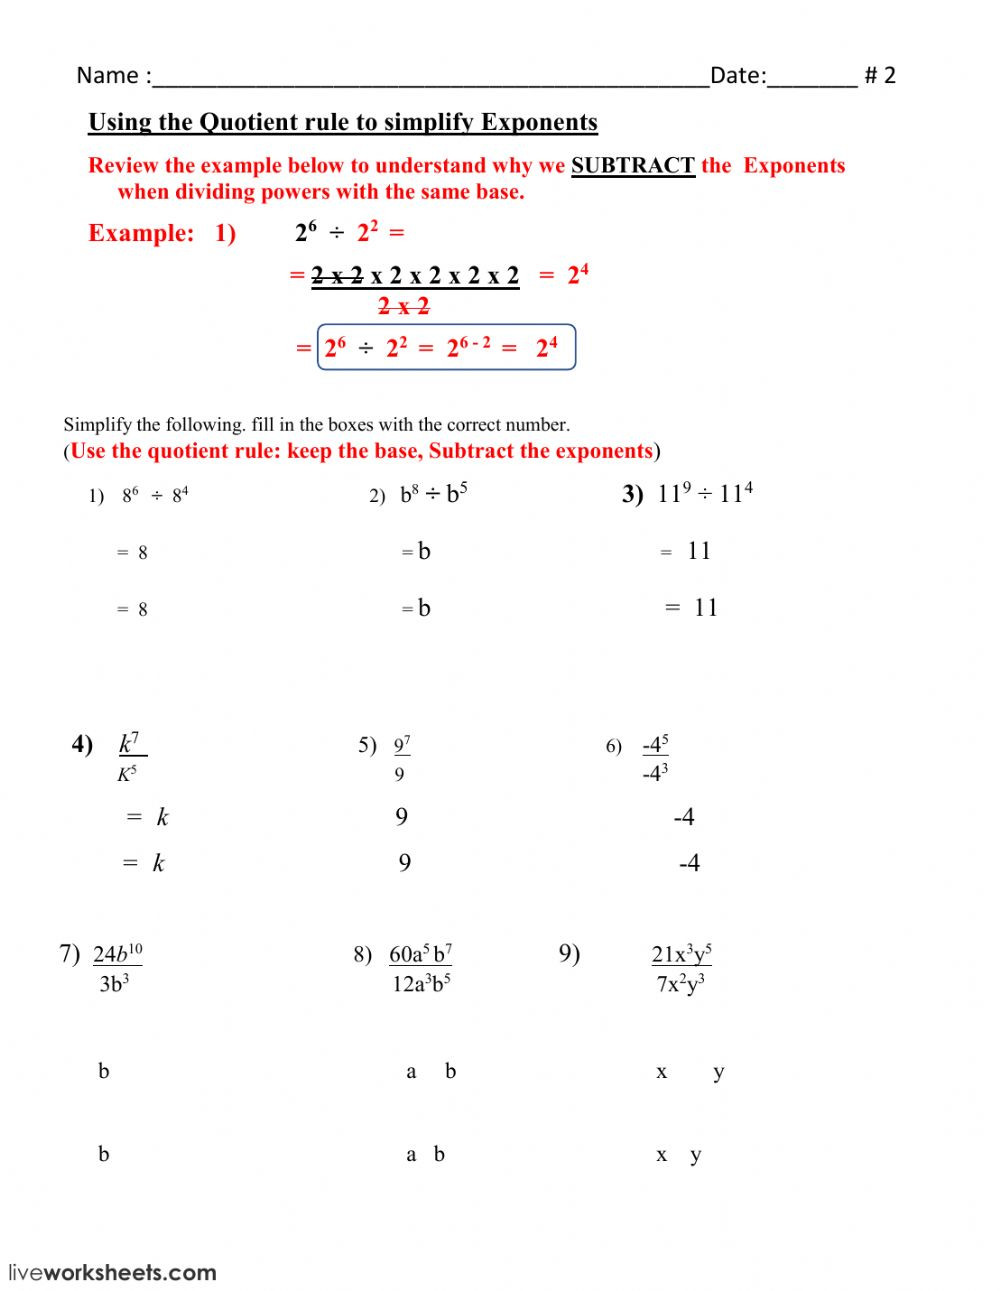 Multiplication Properties Of Exponents Worksheet Laws Of Exponents Exponents Worksheet